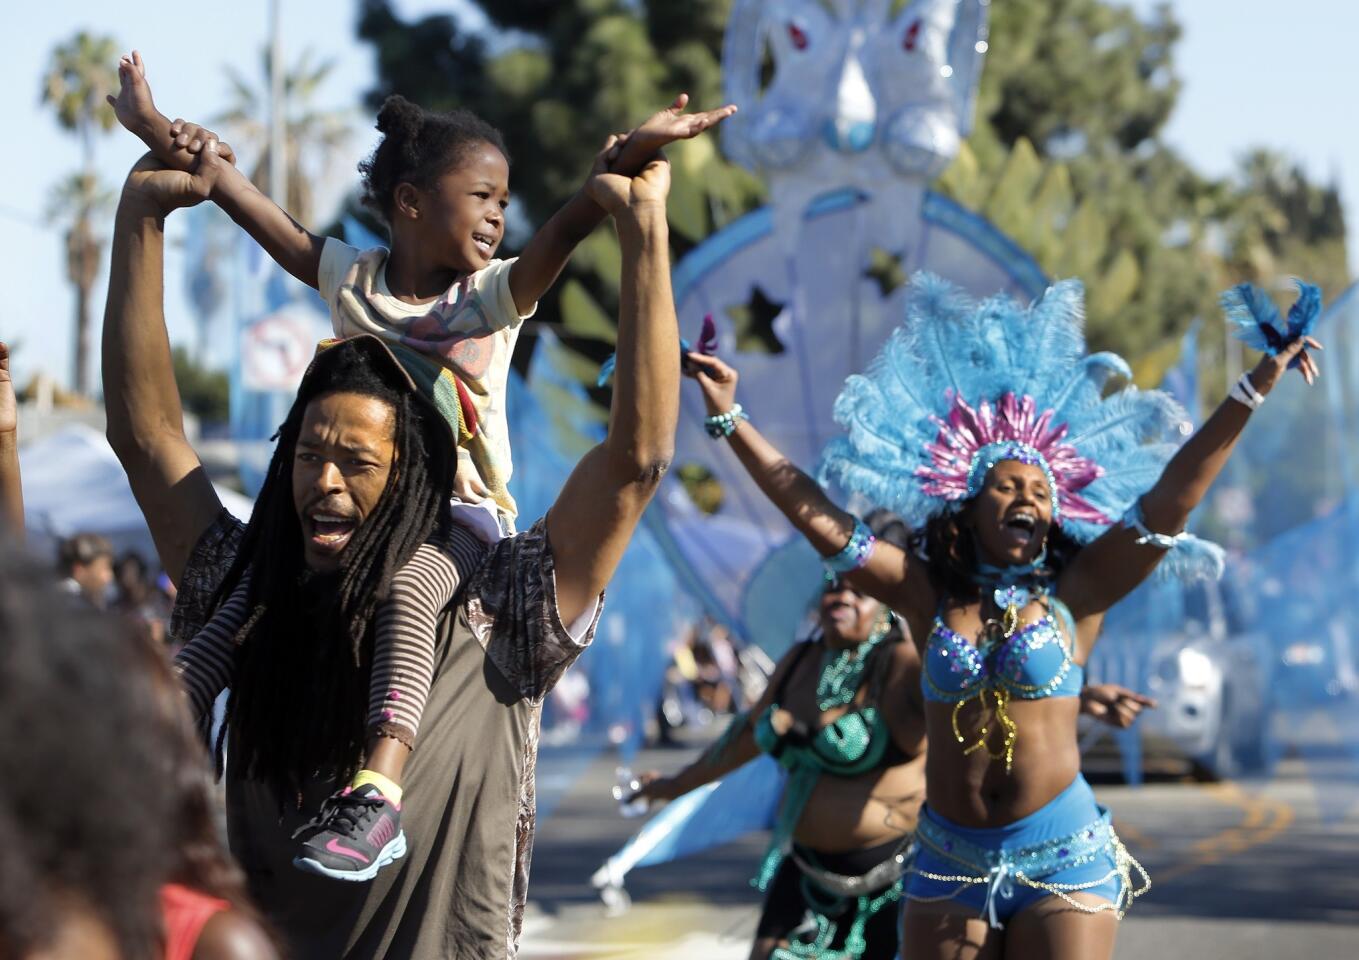 Jerome Garbutt gives his daughter Jahzara, 5, a ride on his shoulders while marching with members of Trinifeters, a Caribbean dance group, as they perform during the 29th Annual Martin Luther King Jr. Kingdom Day Parade.